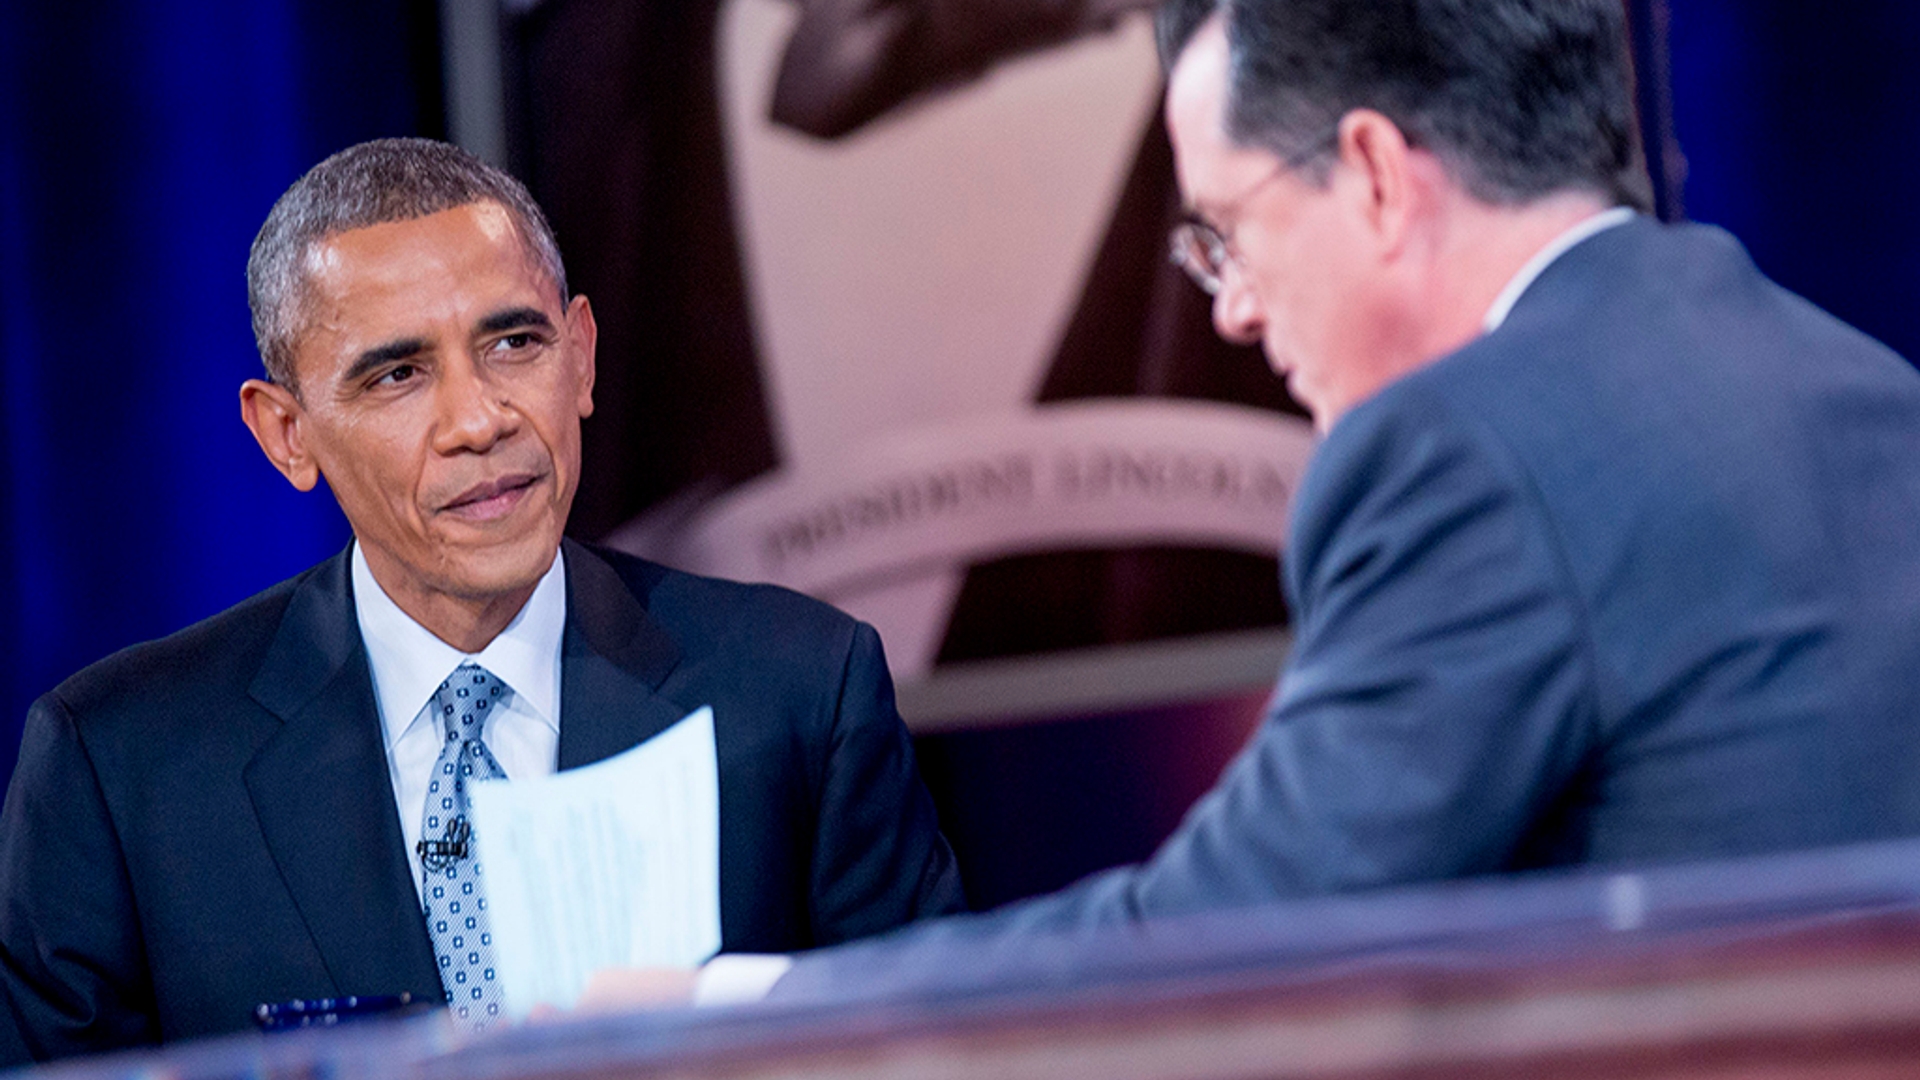 President Obama Tapes An Interview For The Colbert Report with Stephen Colbert